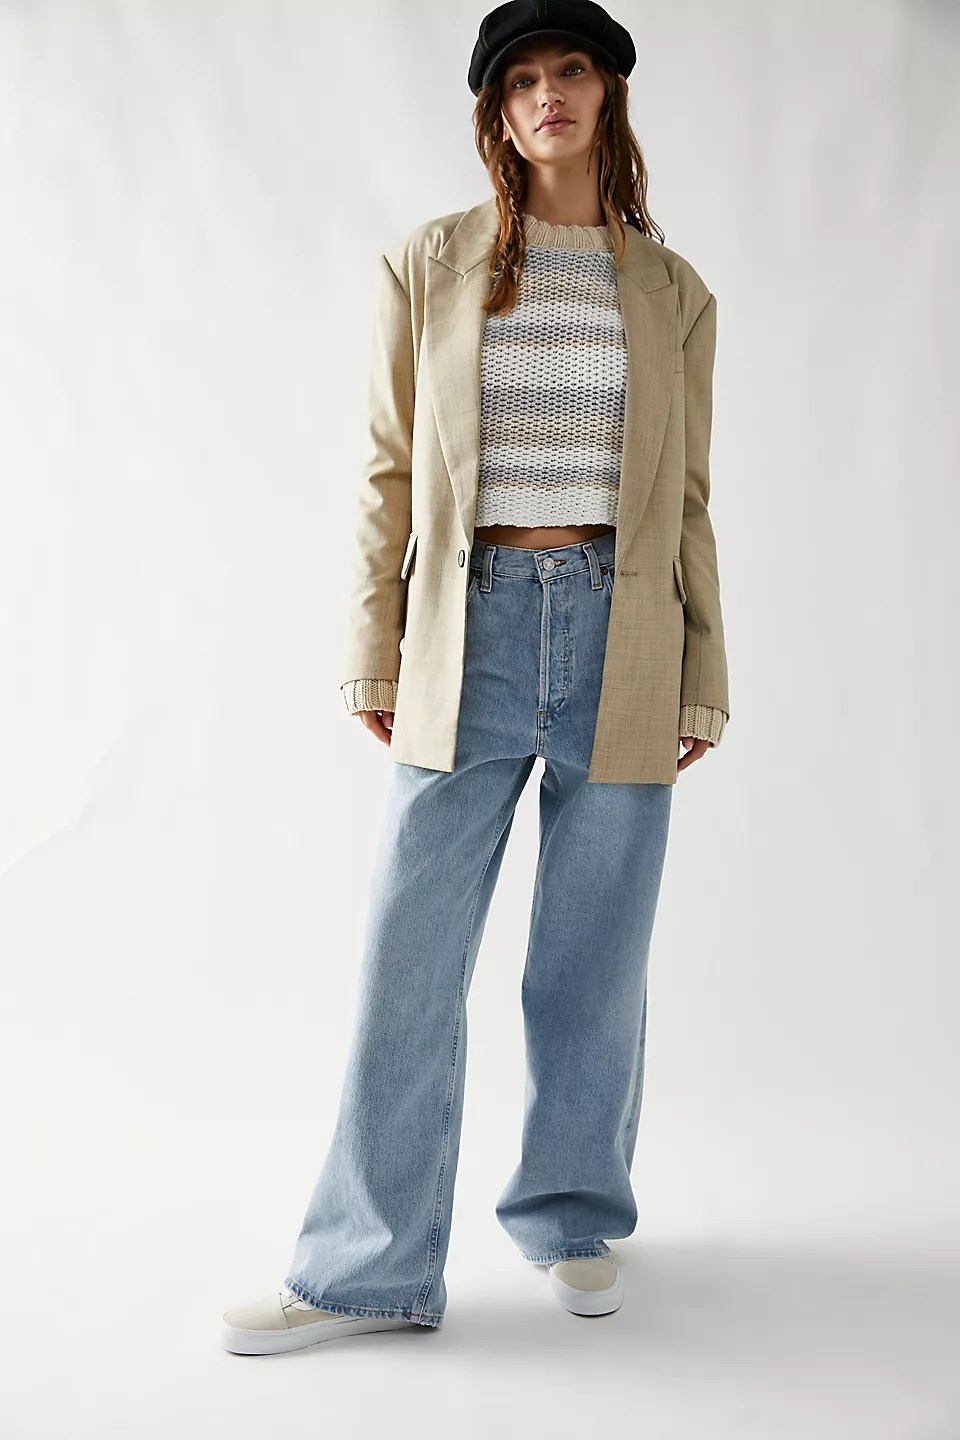 agolde low rise baggy jeans on a model wearing a knit sweater and a blazer